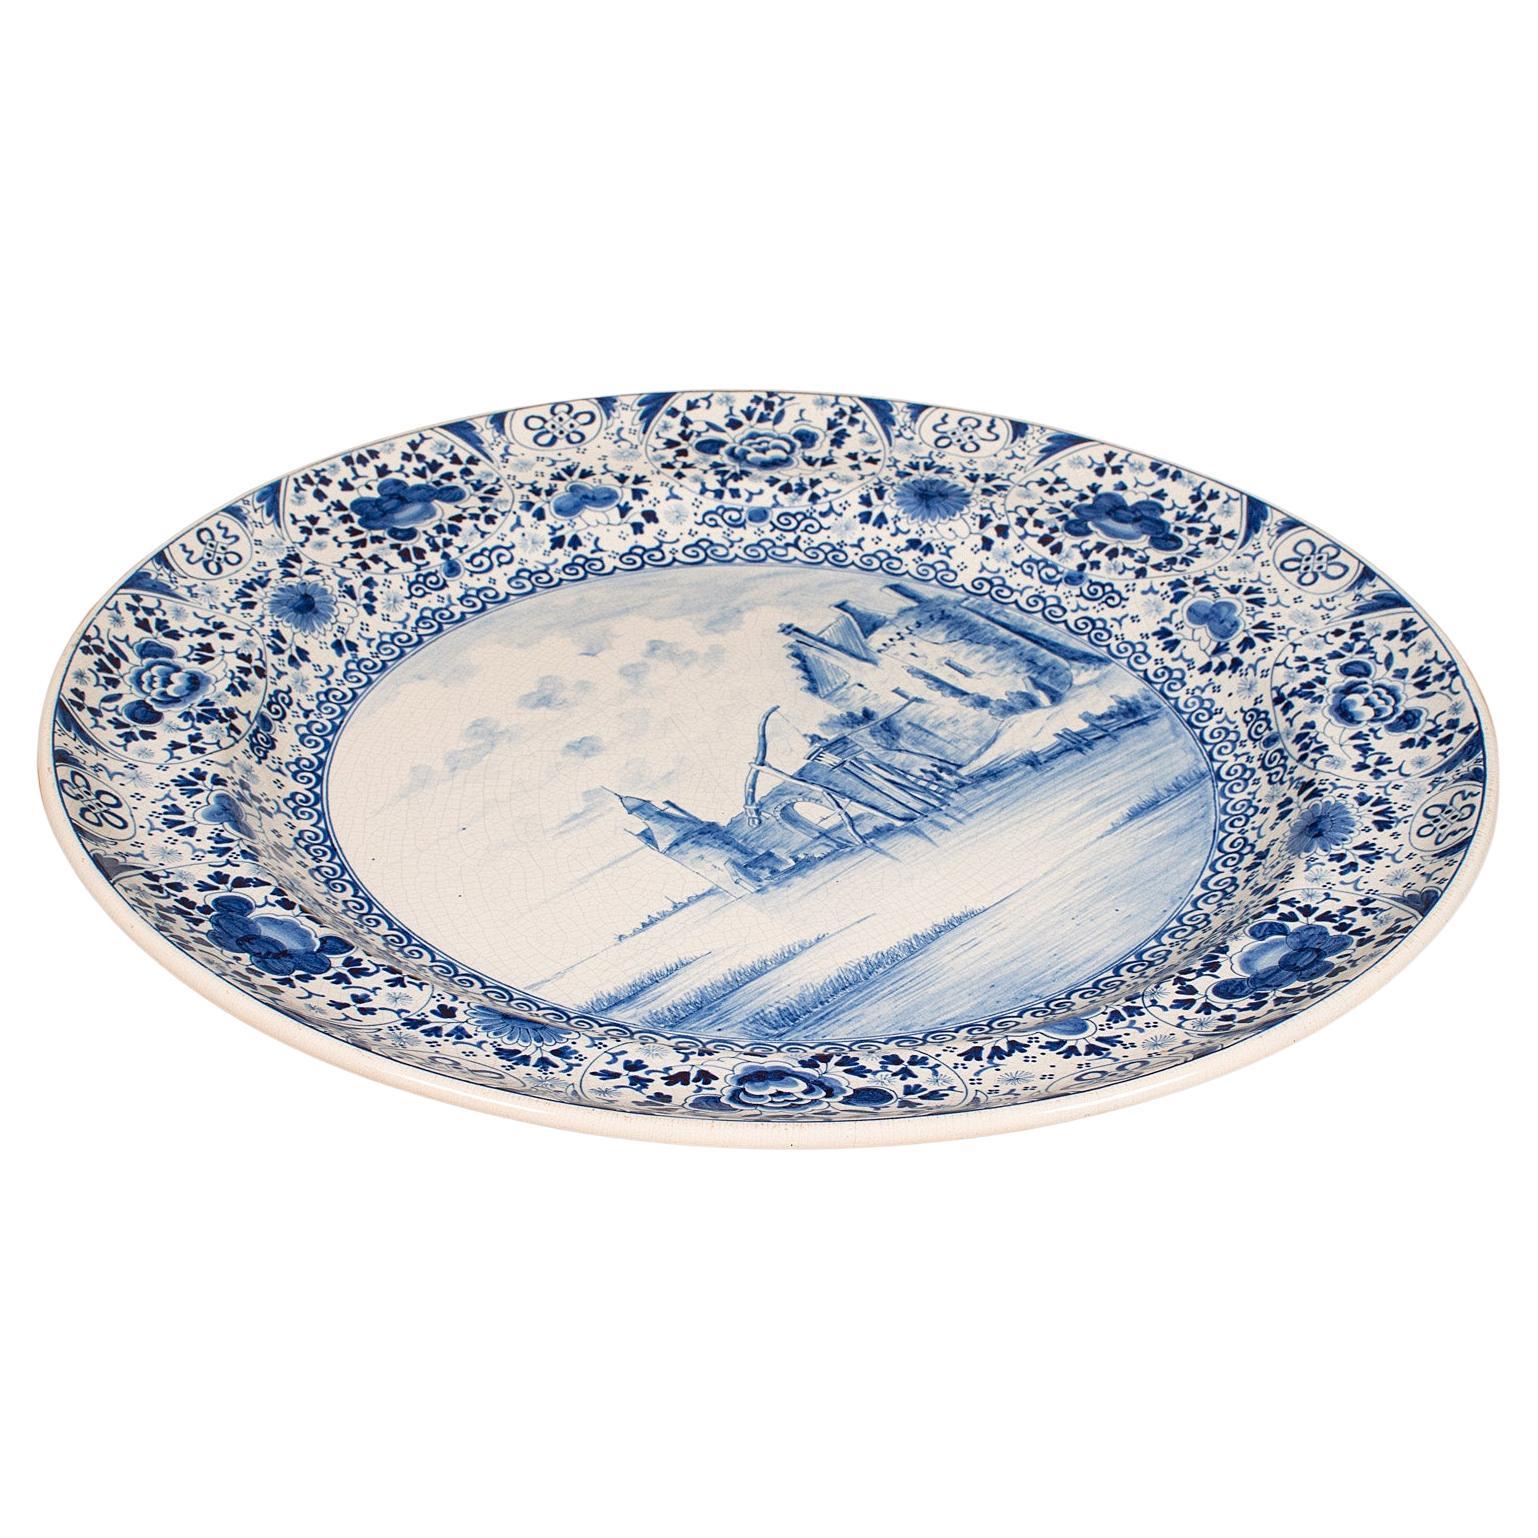 Large Antique Charger, Belgian, Ceramic, Serving Plate, Blue & White, Circa 1920 For Sale